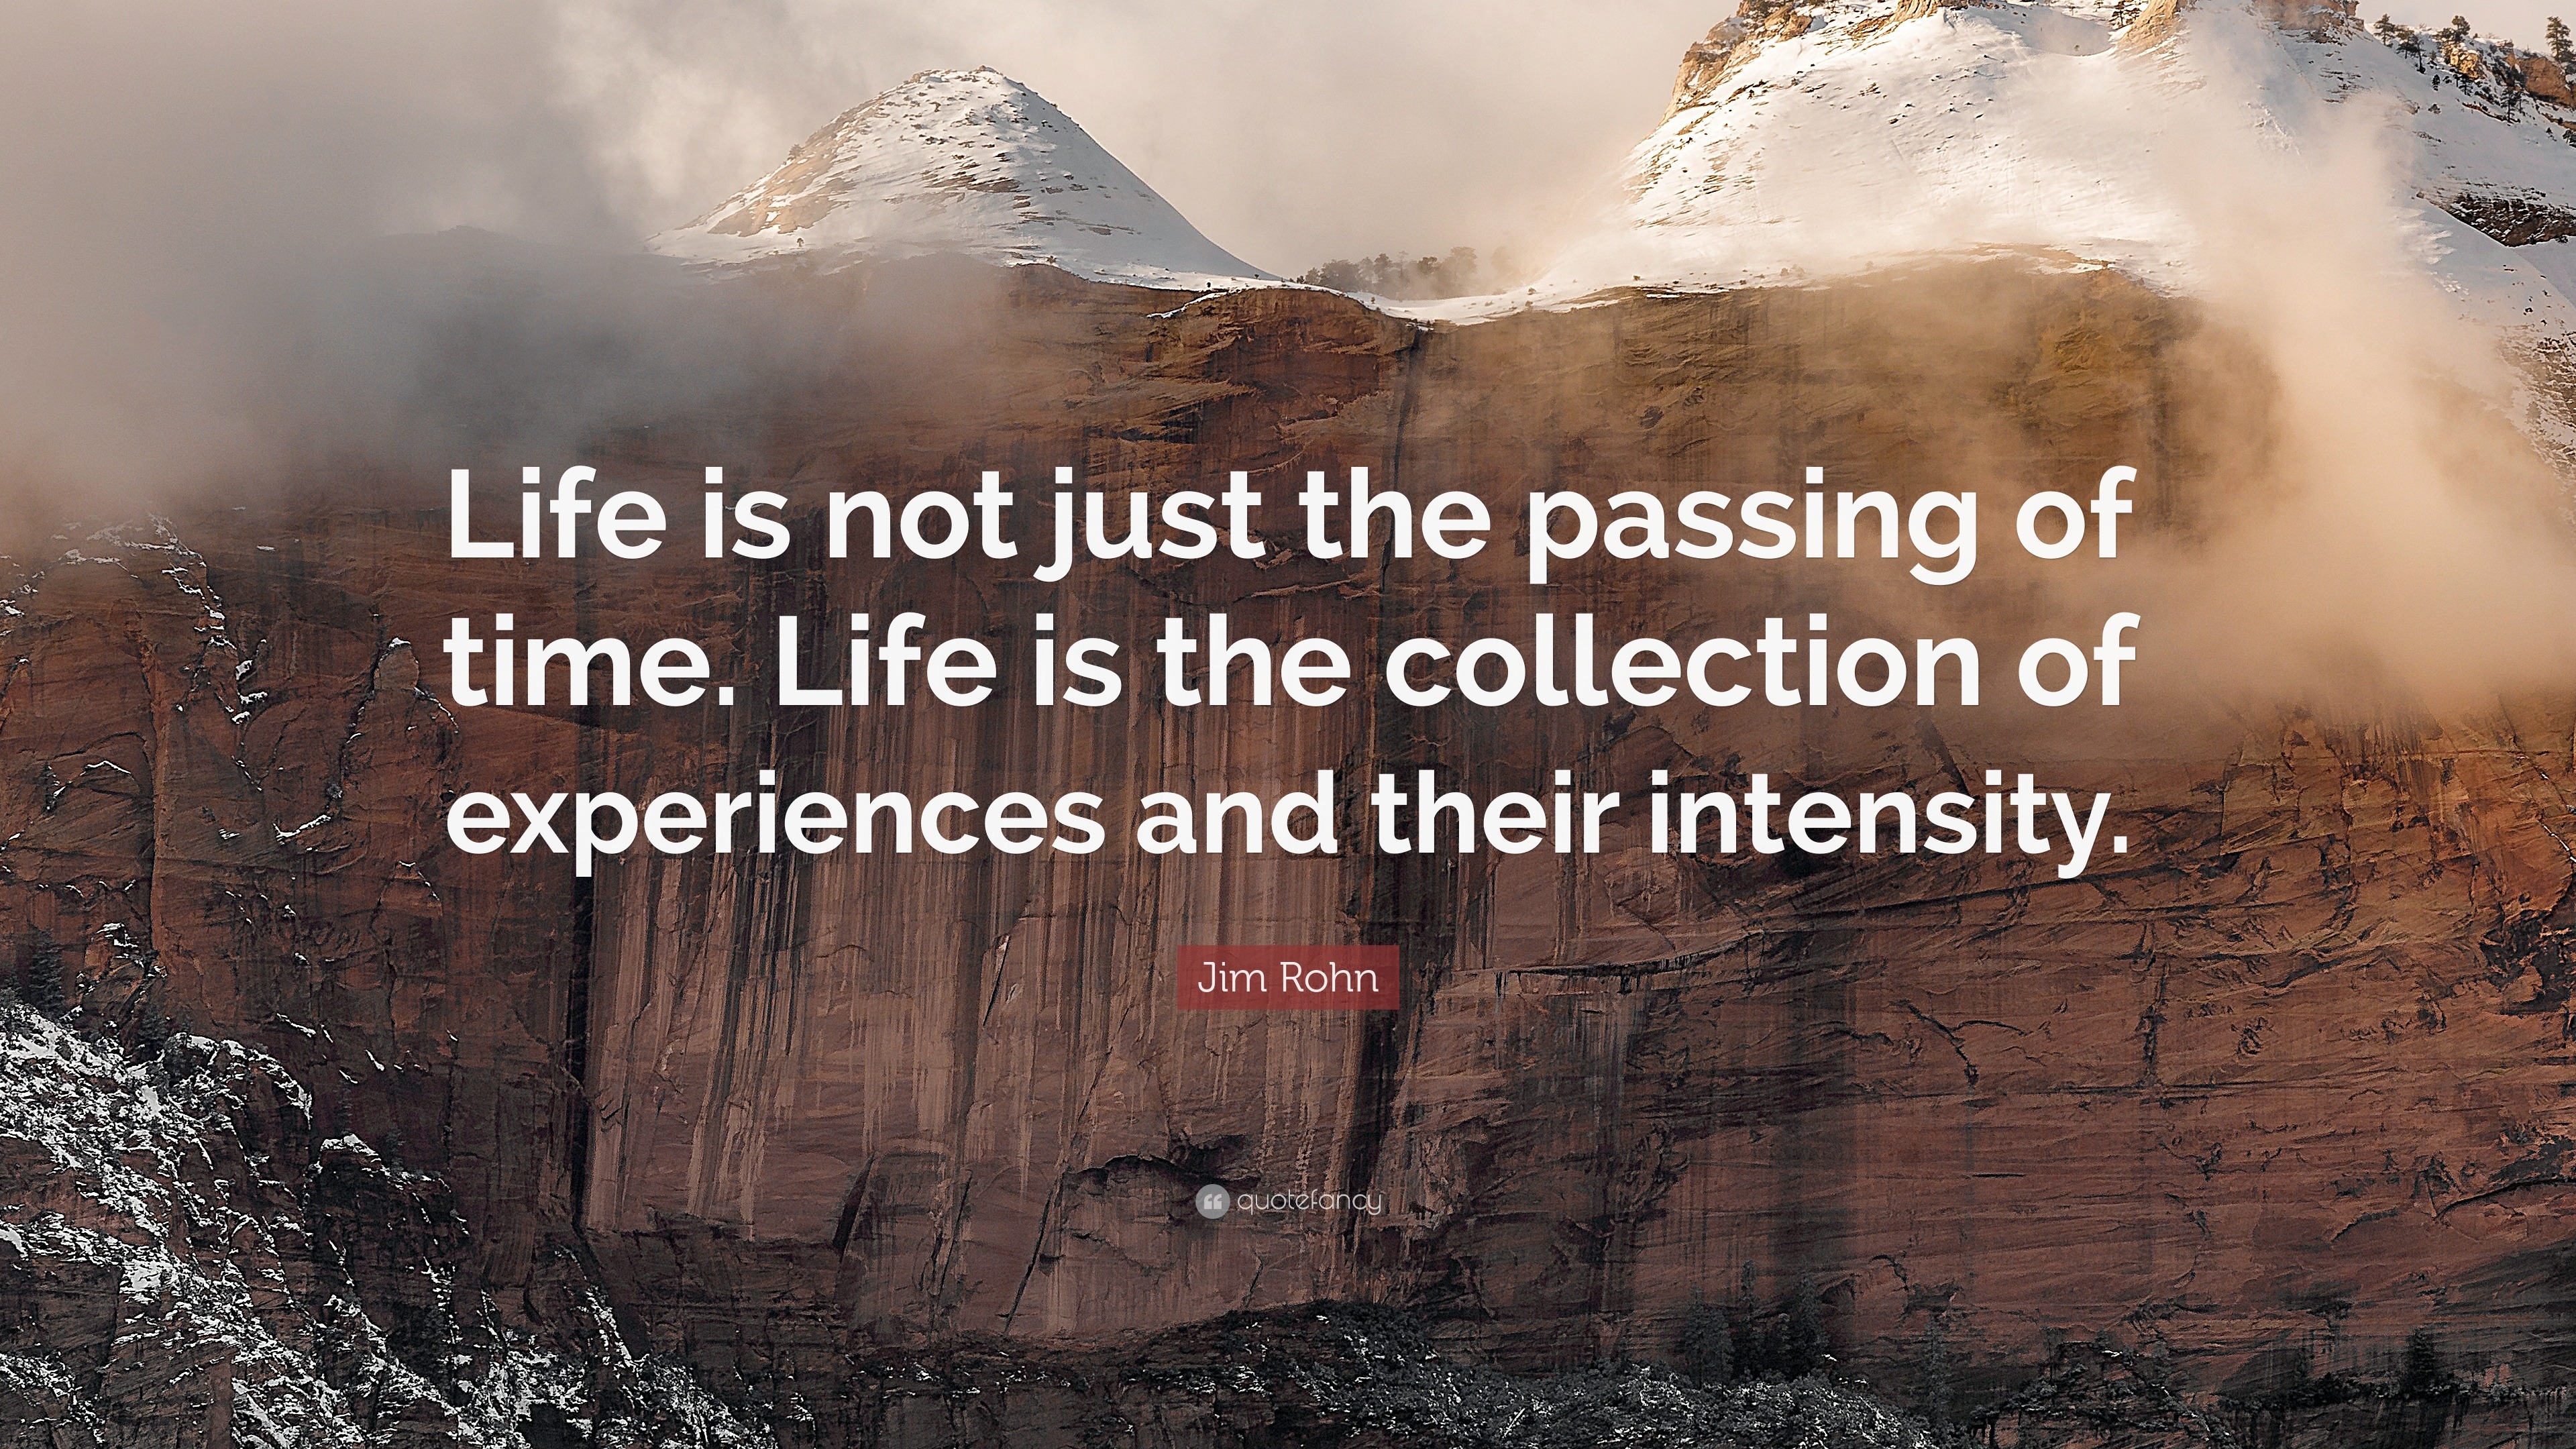 Jim Rohn Quote “Life is not just the passing of time Life is